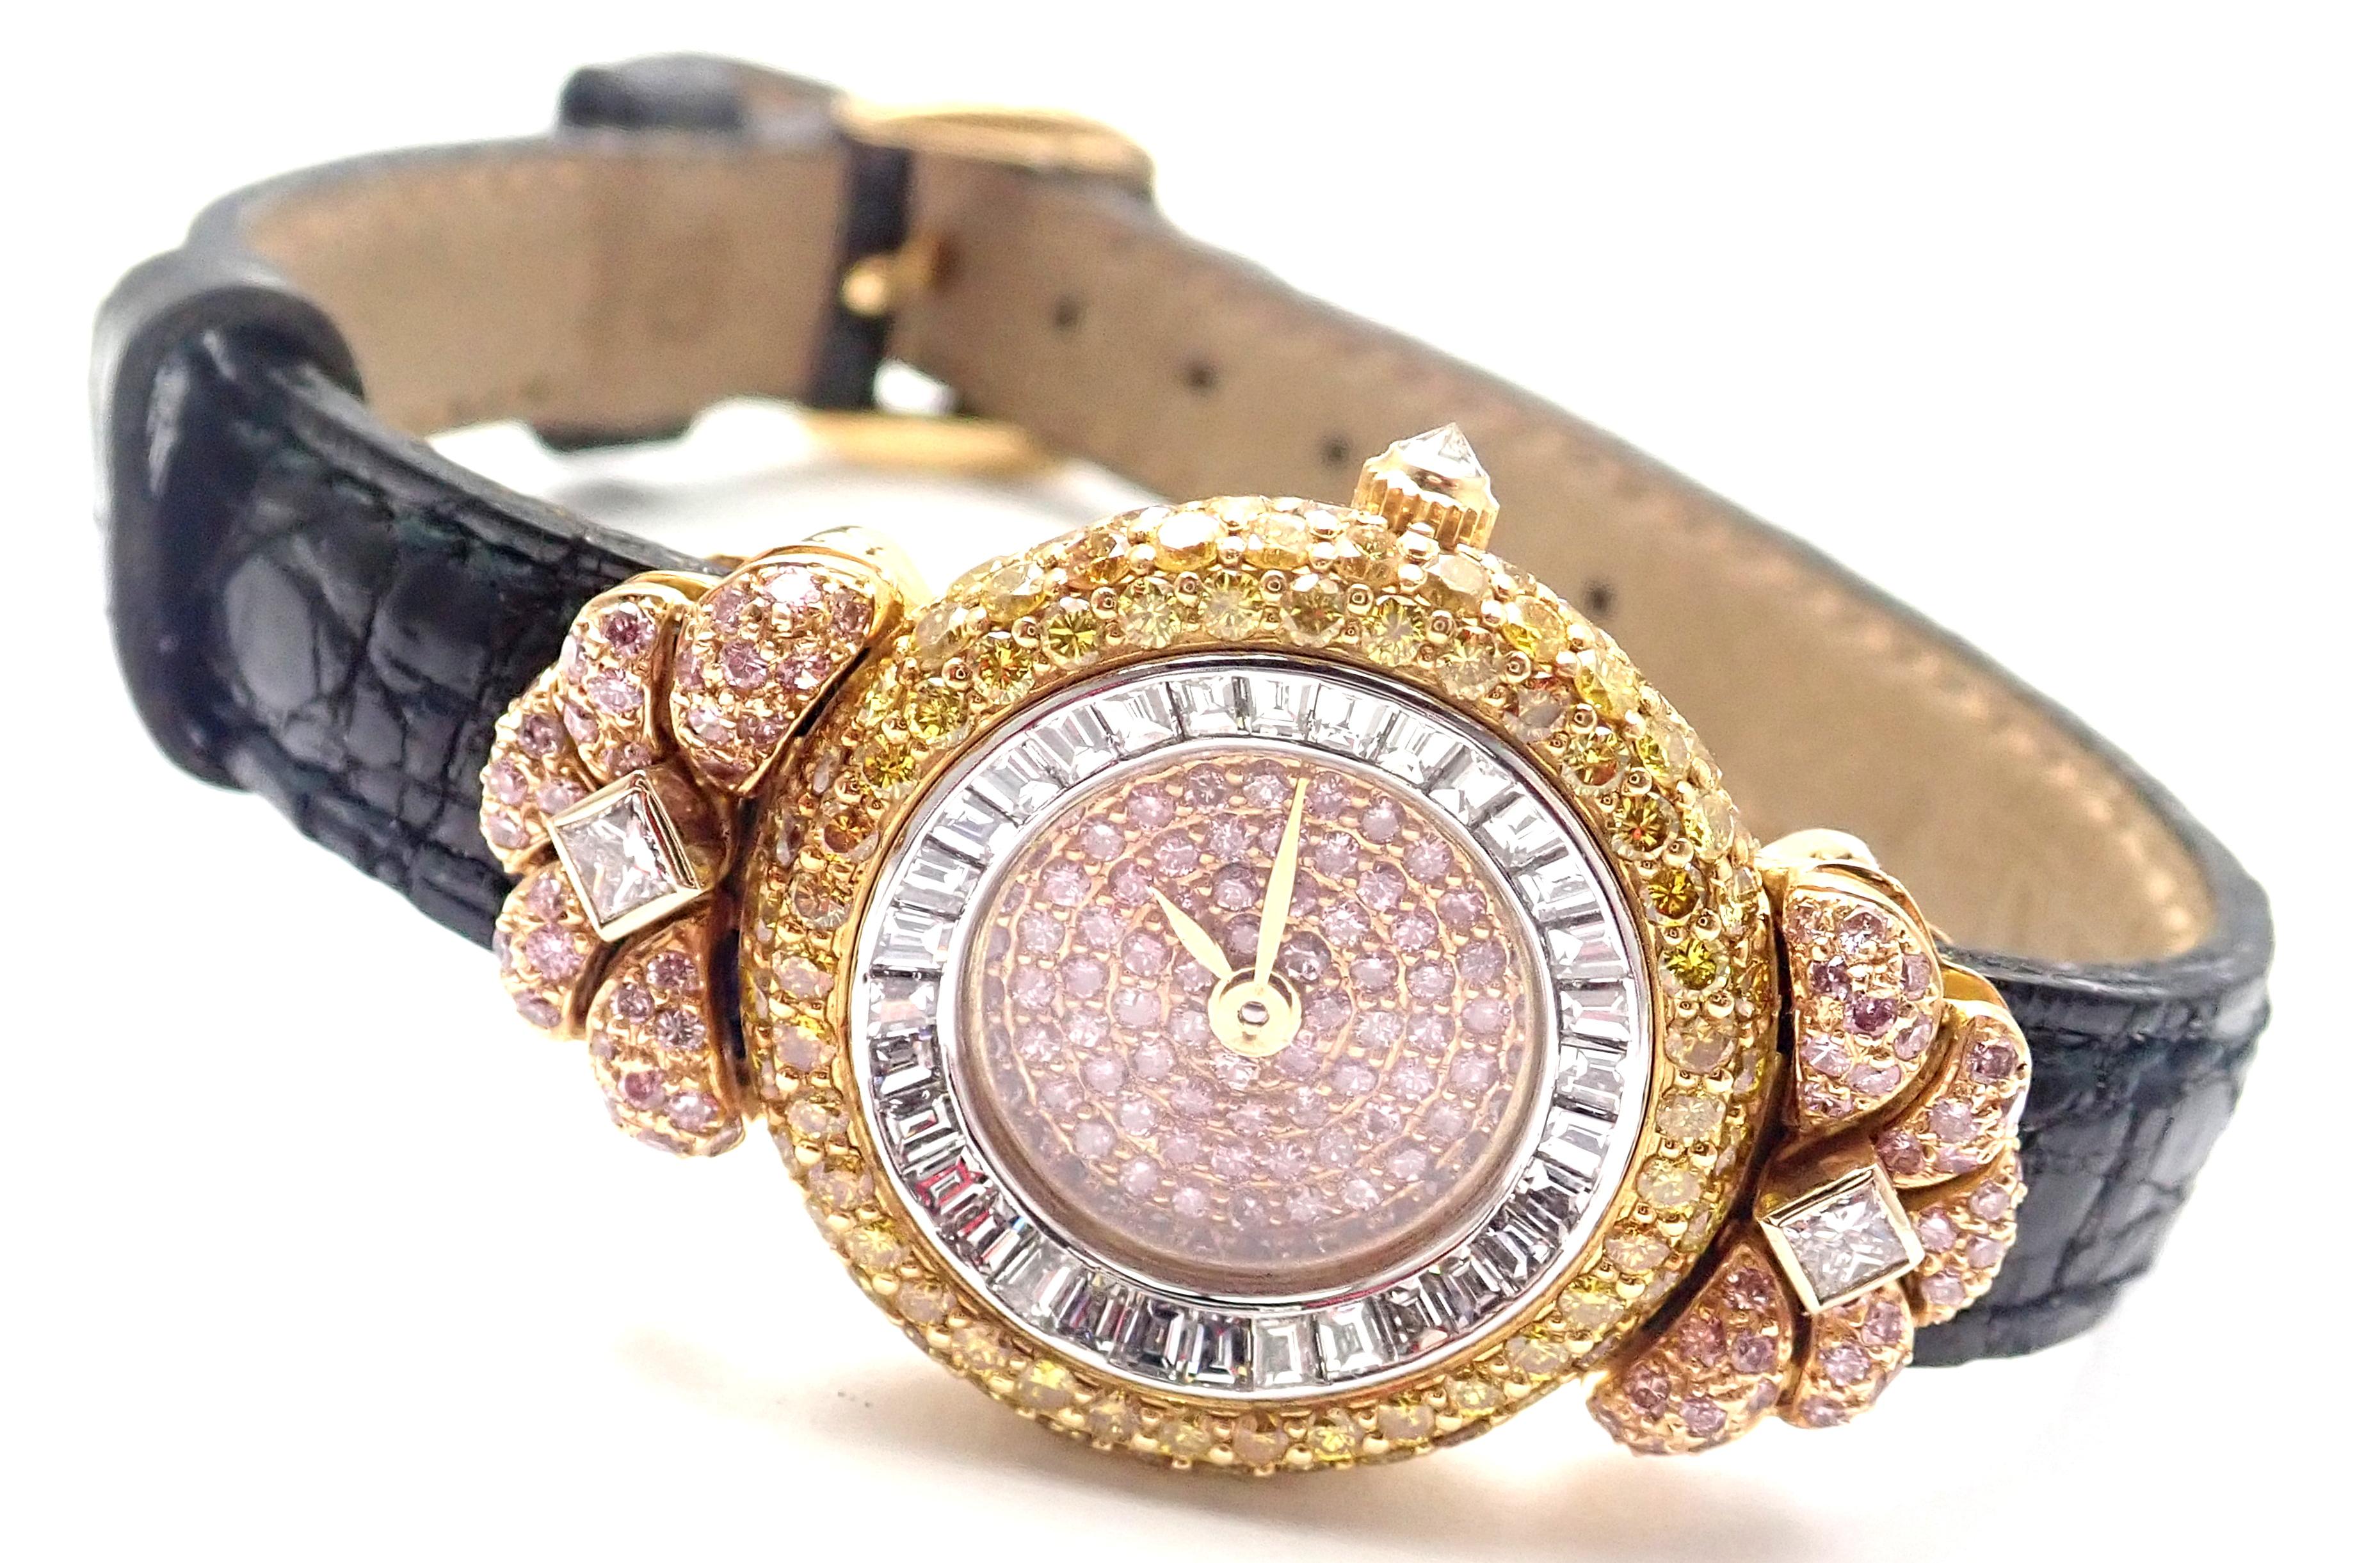 18k Yellow Gold White, Pink and Yellow Diamond Ladies Wristwatch by Graff.
With Round Pink diamond dial
Pink, yellow and white diamonds
Round brilliant cut, 2 princess cut and emerald cut diamonds.
Details: 
18k Yellow gold case with a black leather